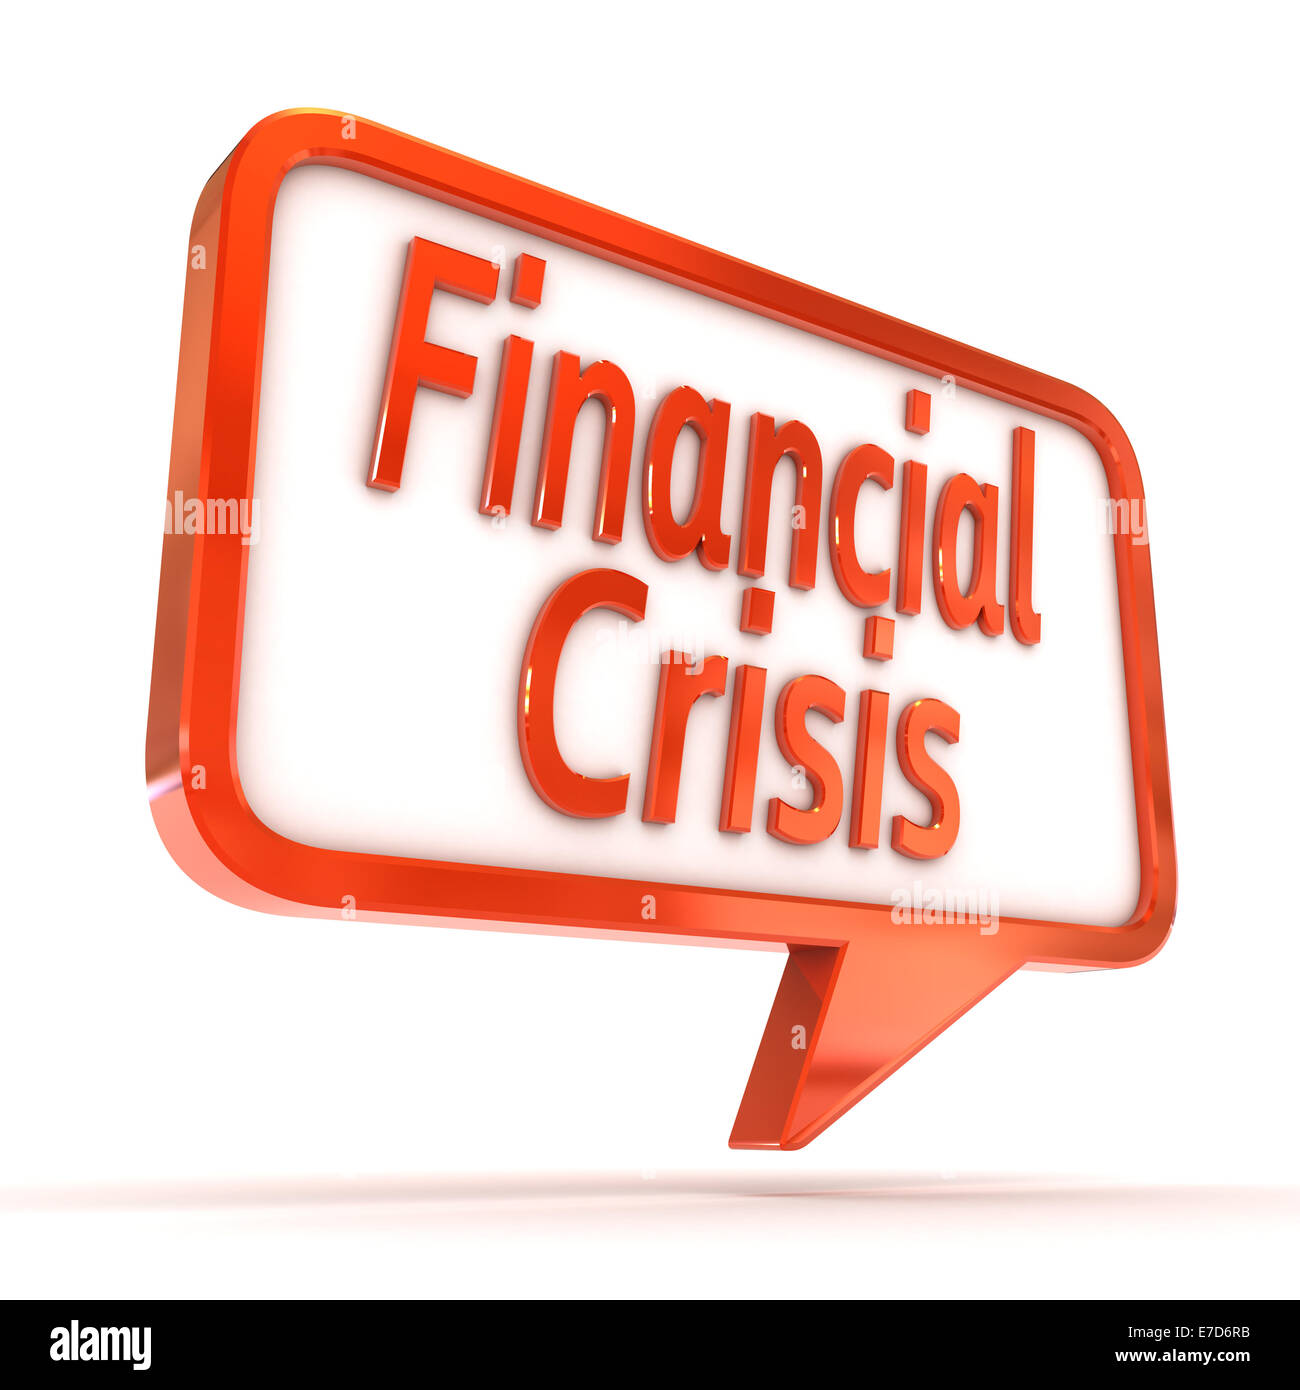 A Colourful 3d Rendered Concept Illustration showing 'Financial Crisis' writen on a Speech bubble Stock Photo